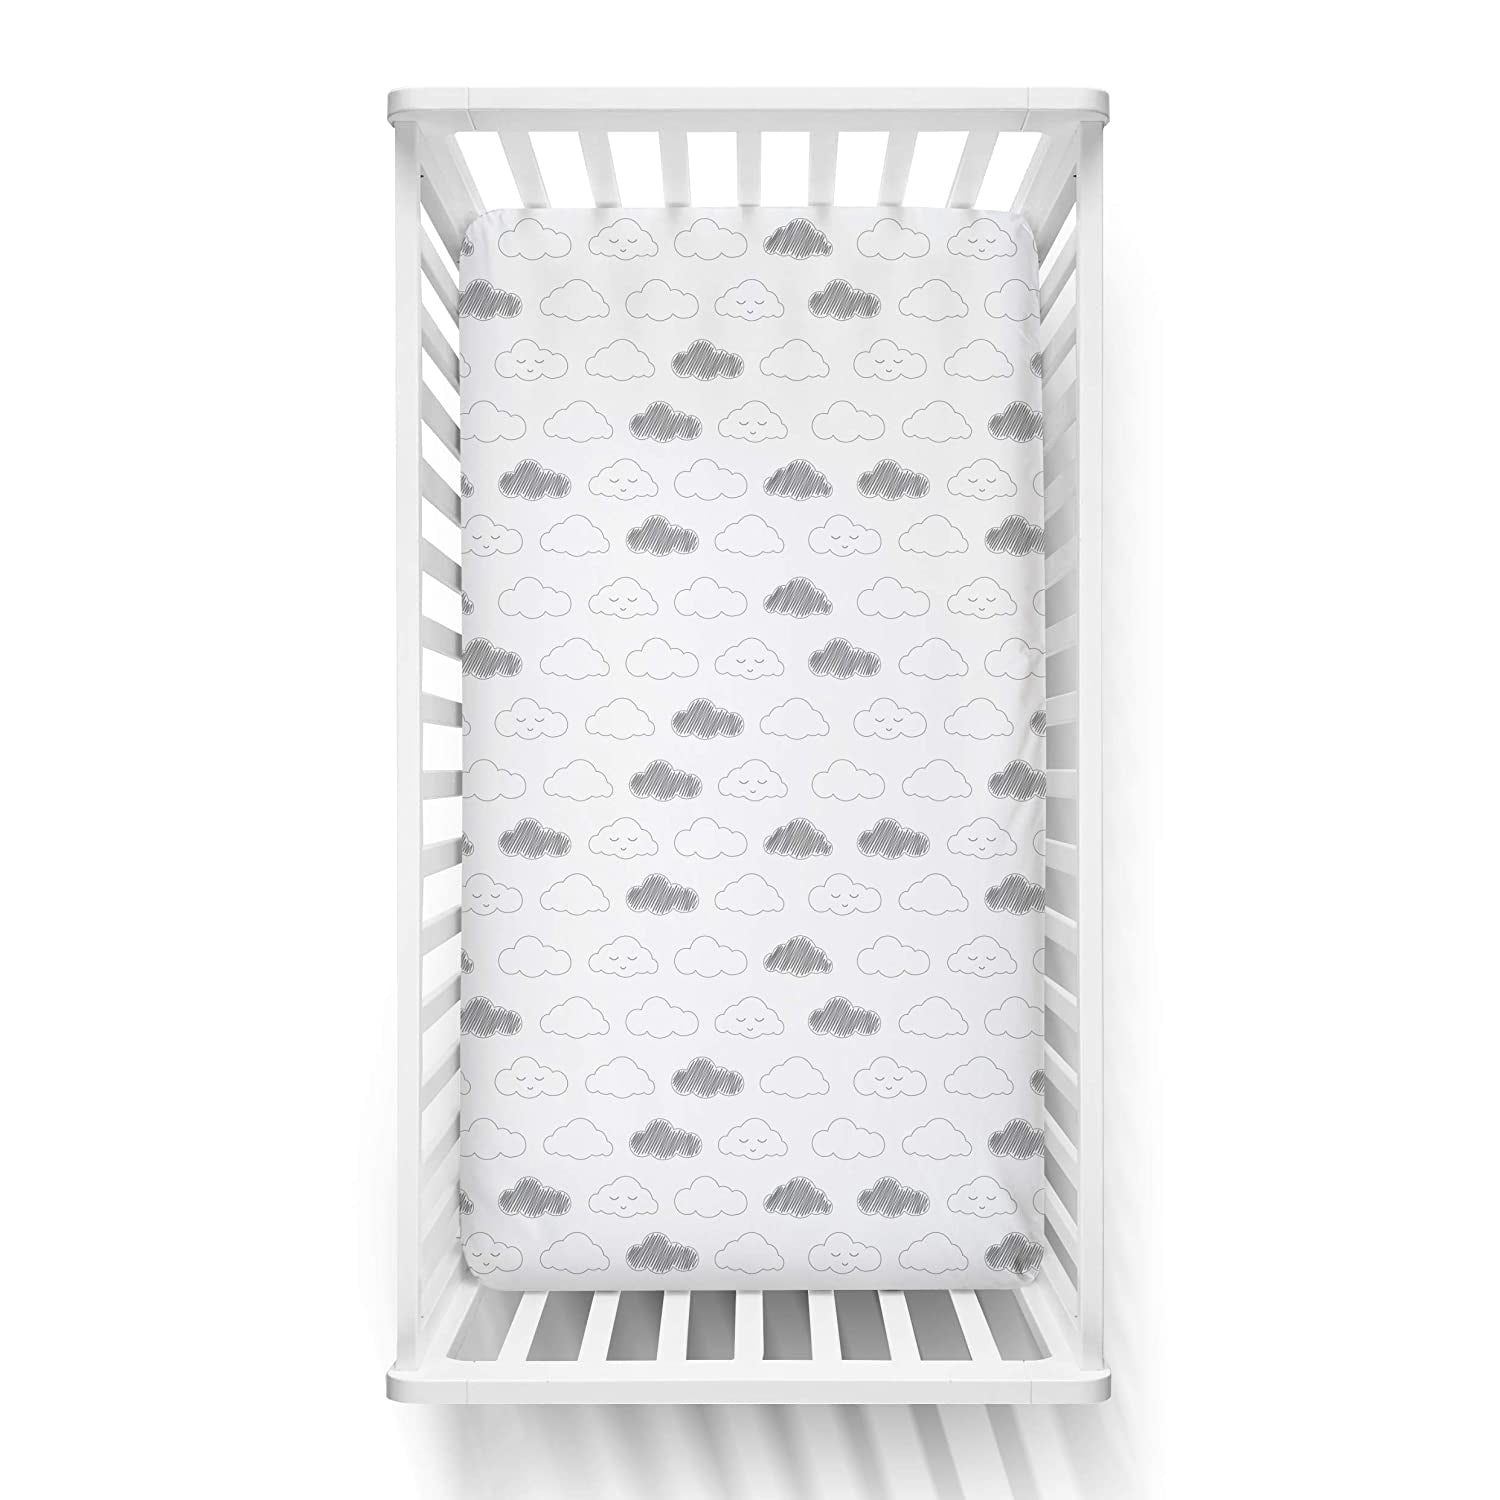 The White Cradle Pure Organic Cotton Fitted Cot Sheet for Baby Crib 24 x 48 inch - Grey Clouds (Medium)